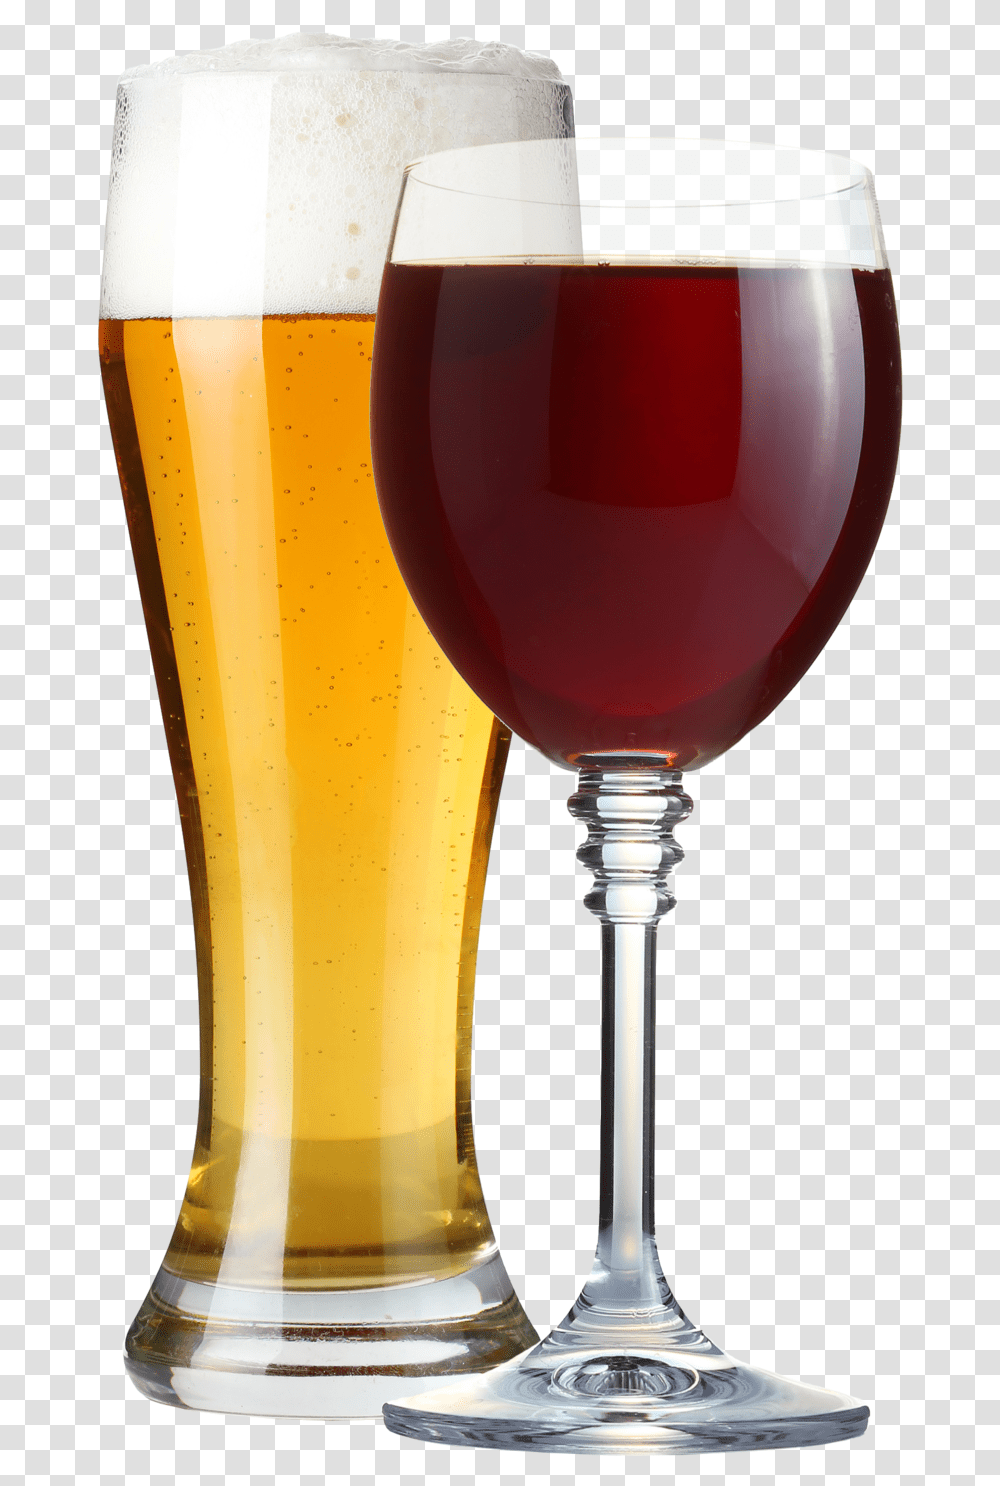 Spend Points On Beers Wine Spirits Soft Drinks Tea, Glass, Beer Glass, Alcohol, Beverage Transparent Png